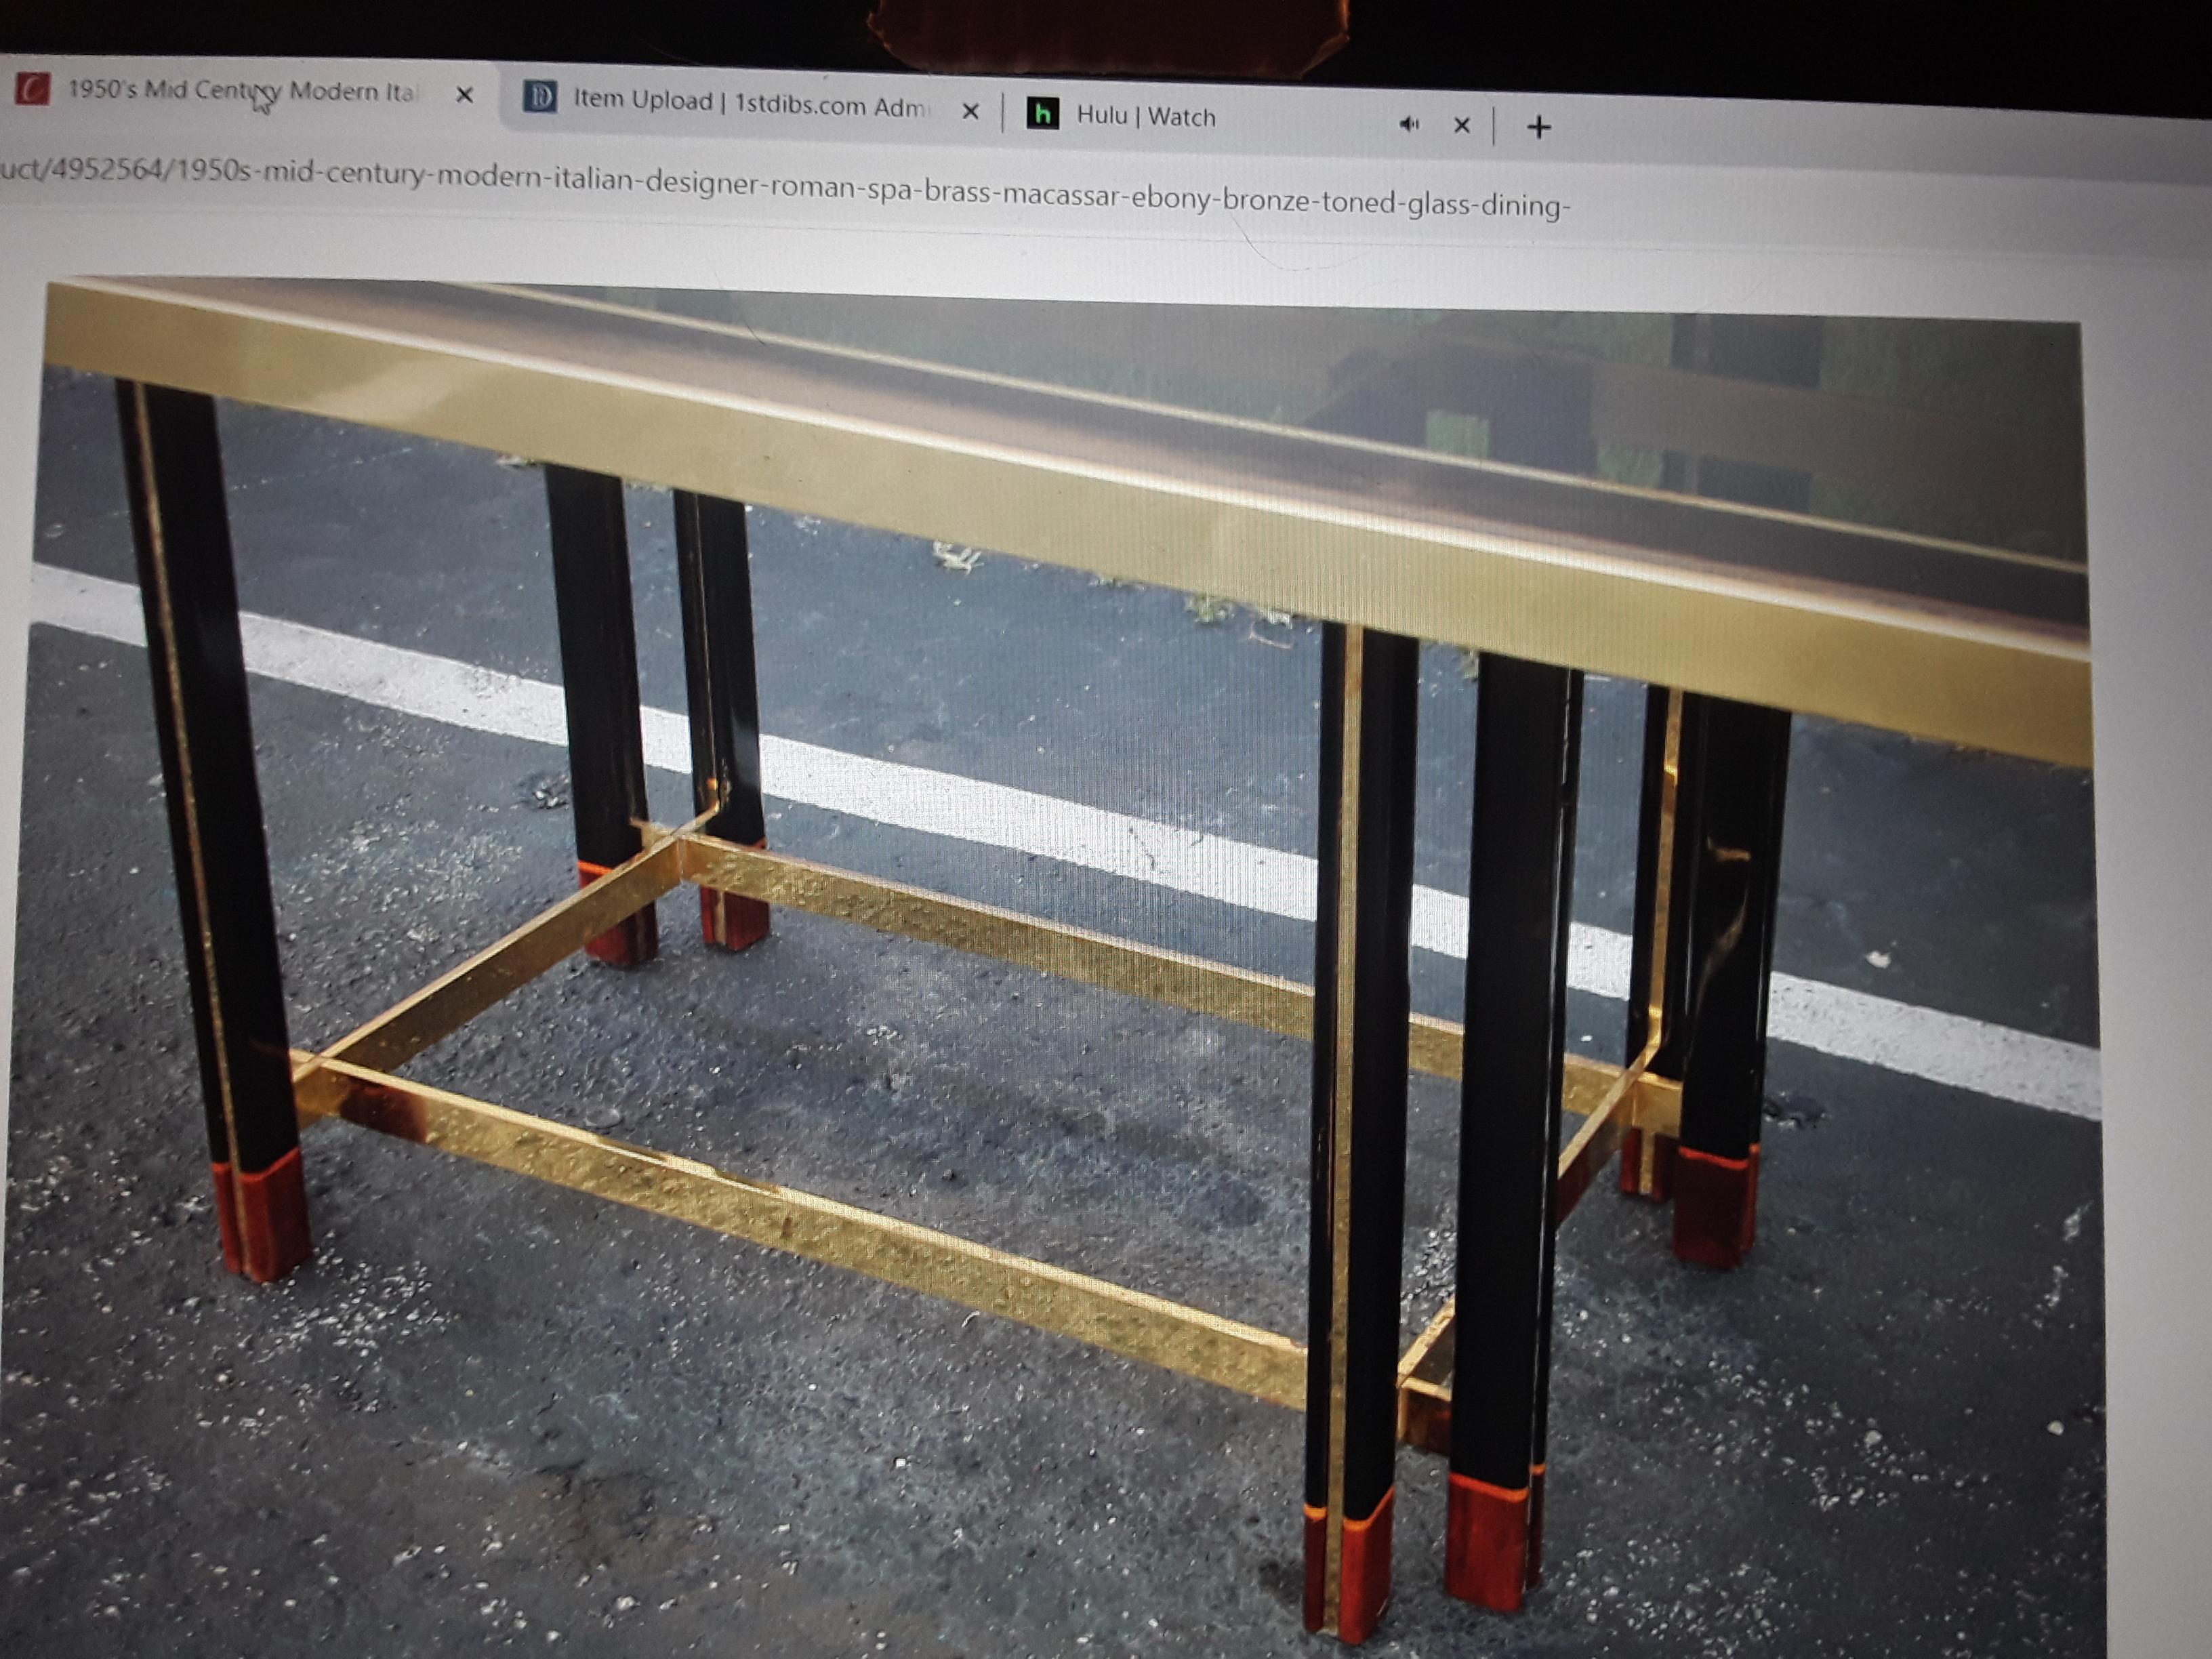 1950's MCM Brass/ Macassar Ebony/ Bronze Toned Glass Dining Table by Roman Spa For Sale 4